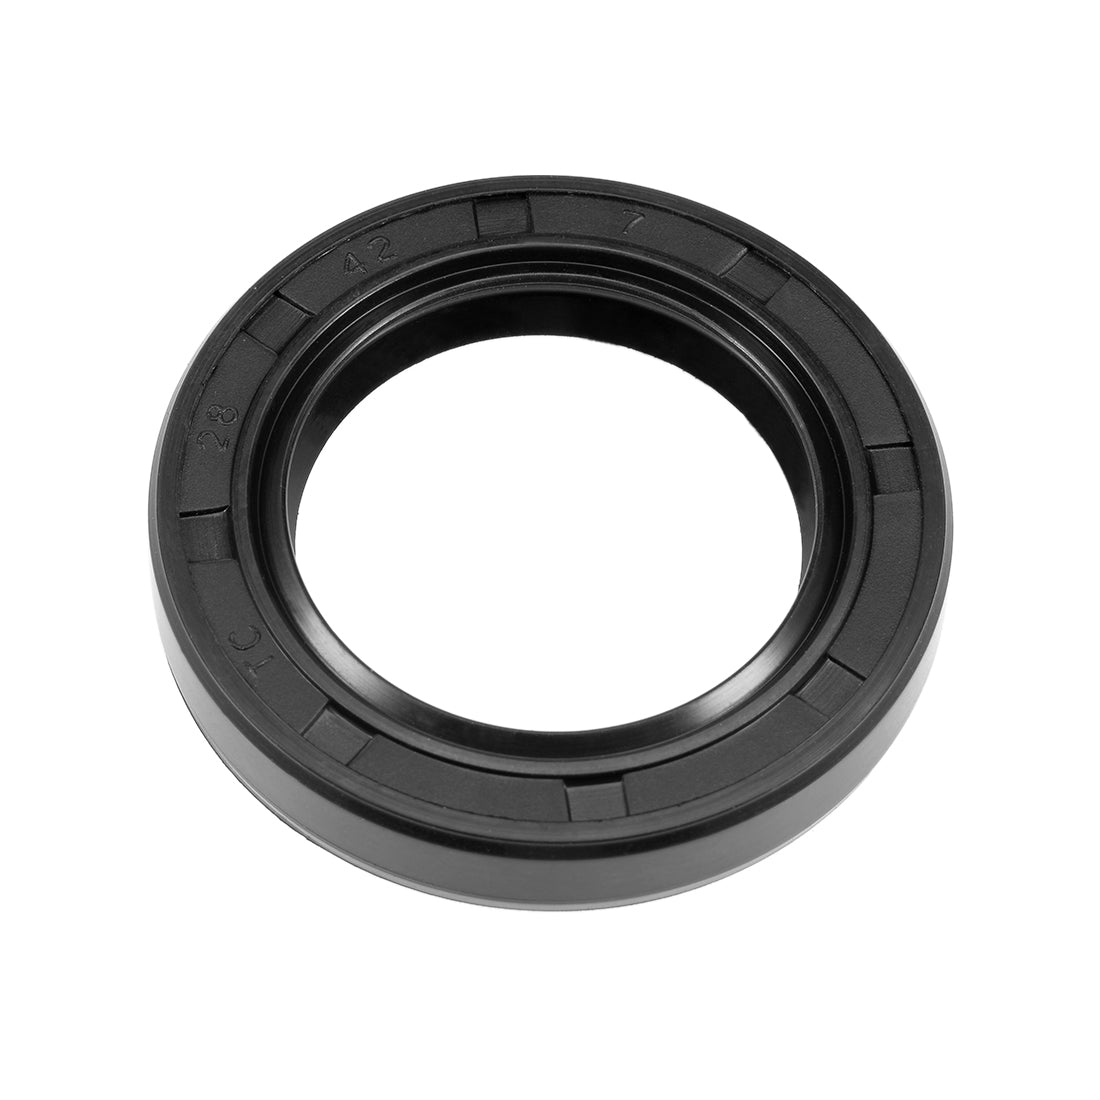 uxcell Uxcell Oil Seal, TC 28mm x 42mm x 7mm, Nitrile Rubber Cover Double Lip